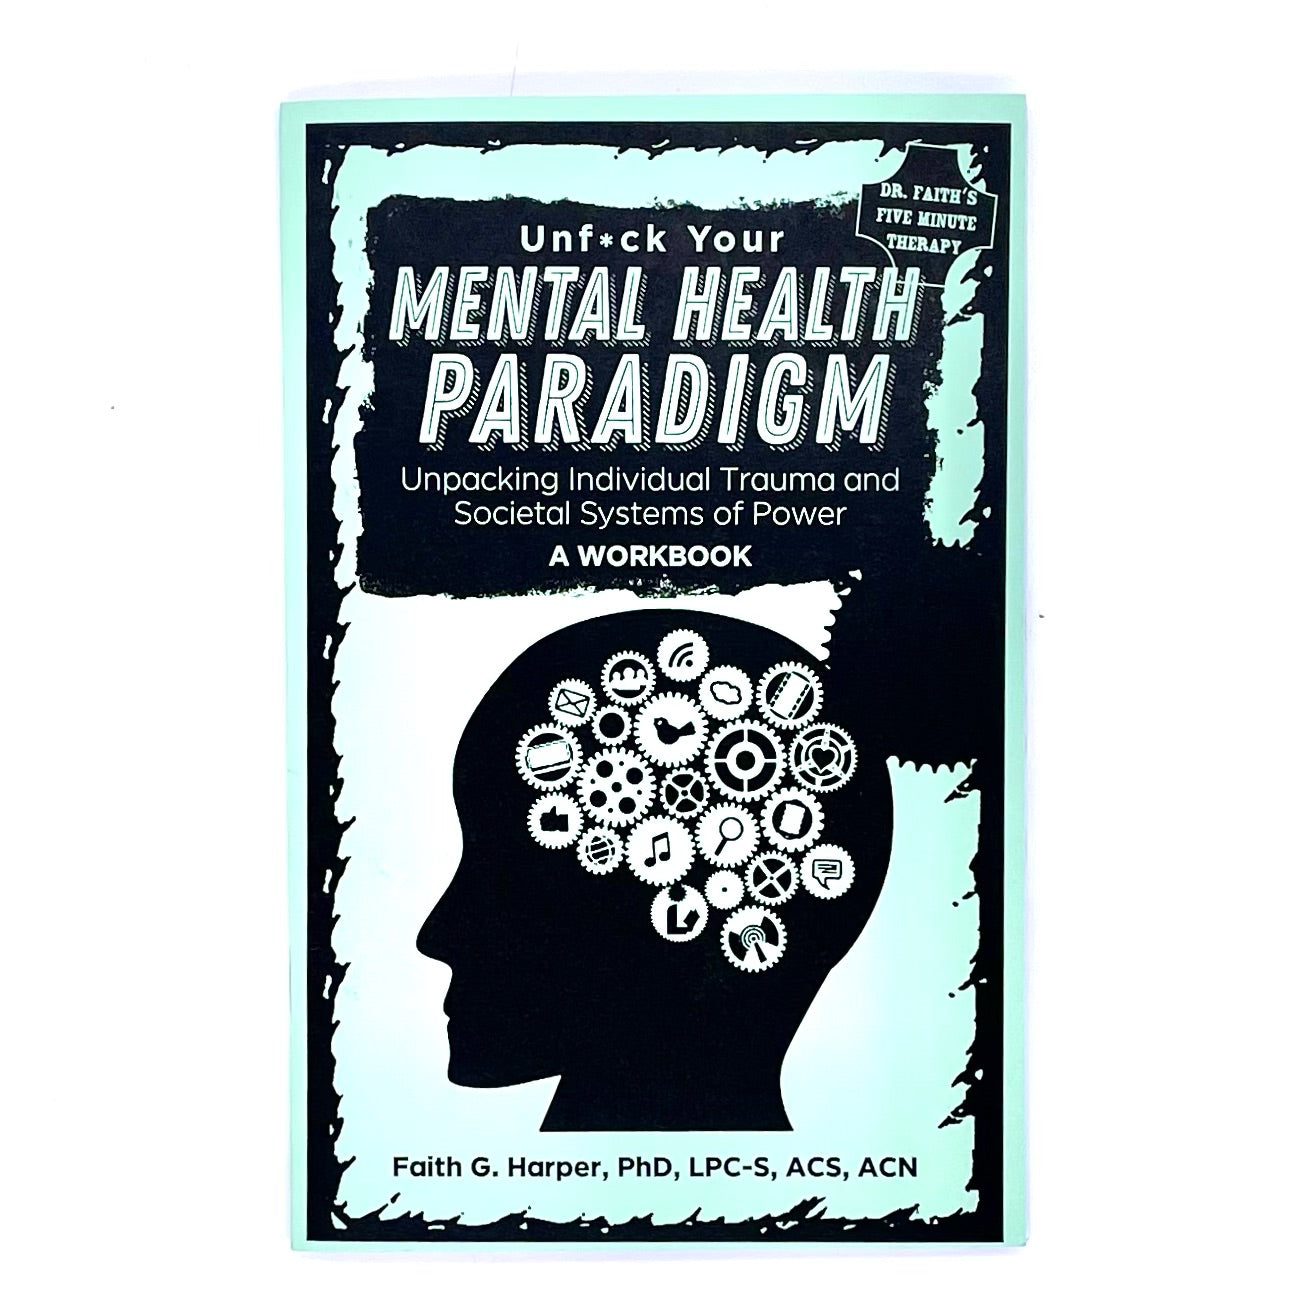 Book cover of Unfuck Your Mental Health Paradigm by Faith G Harper.